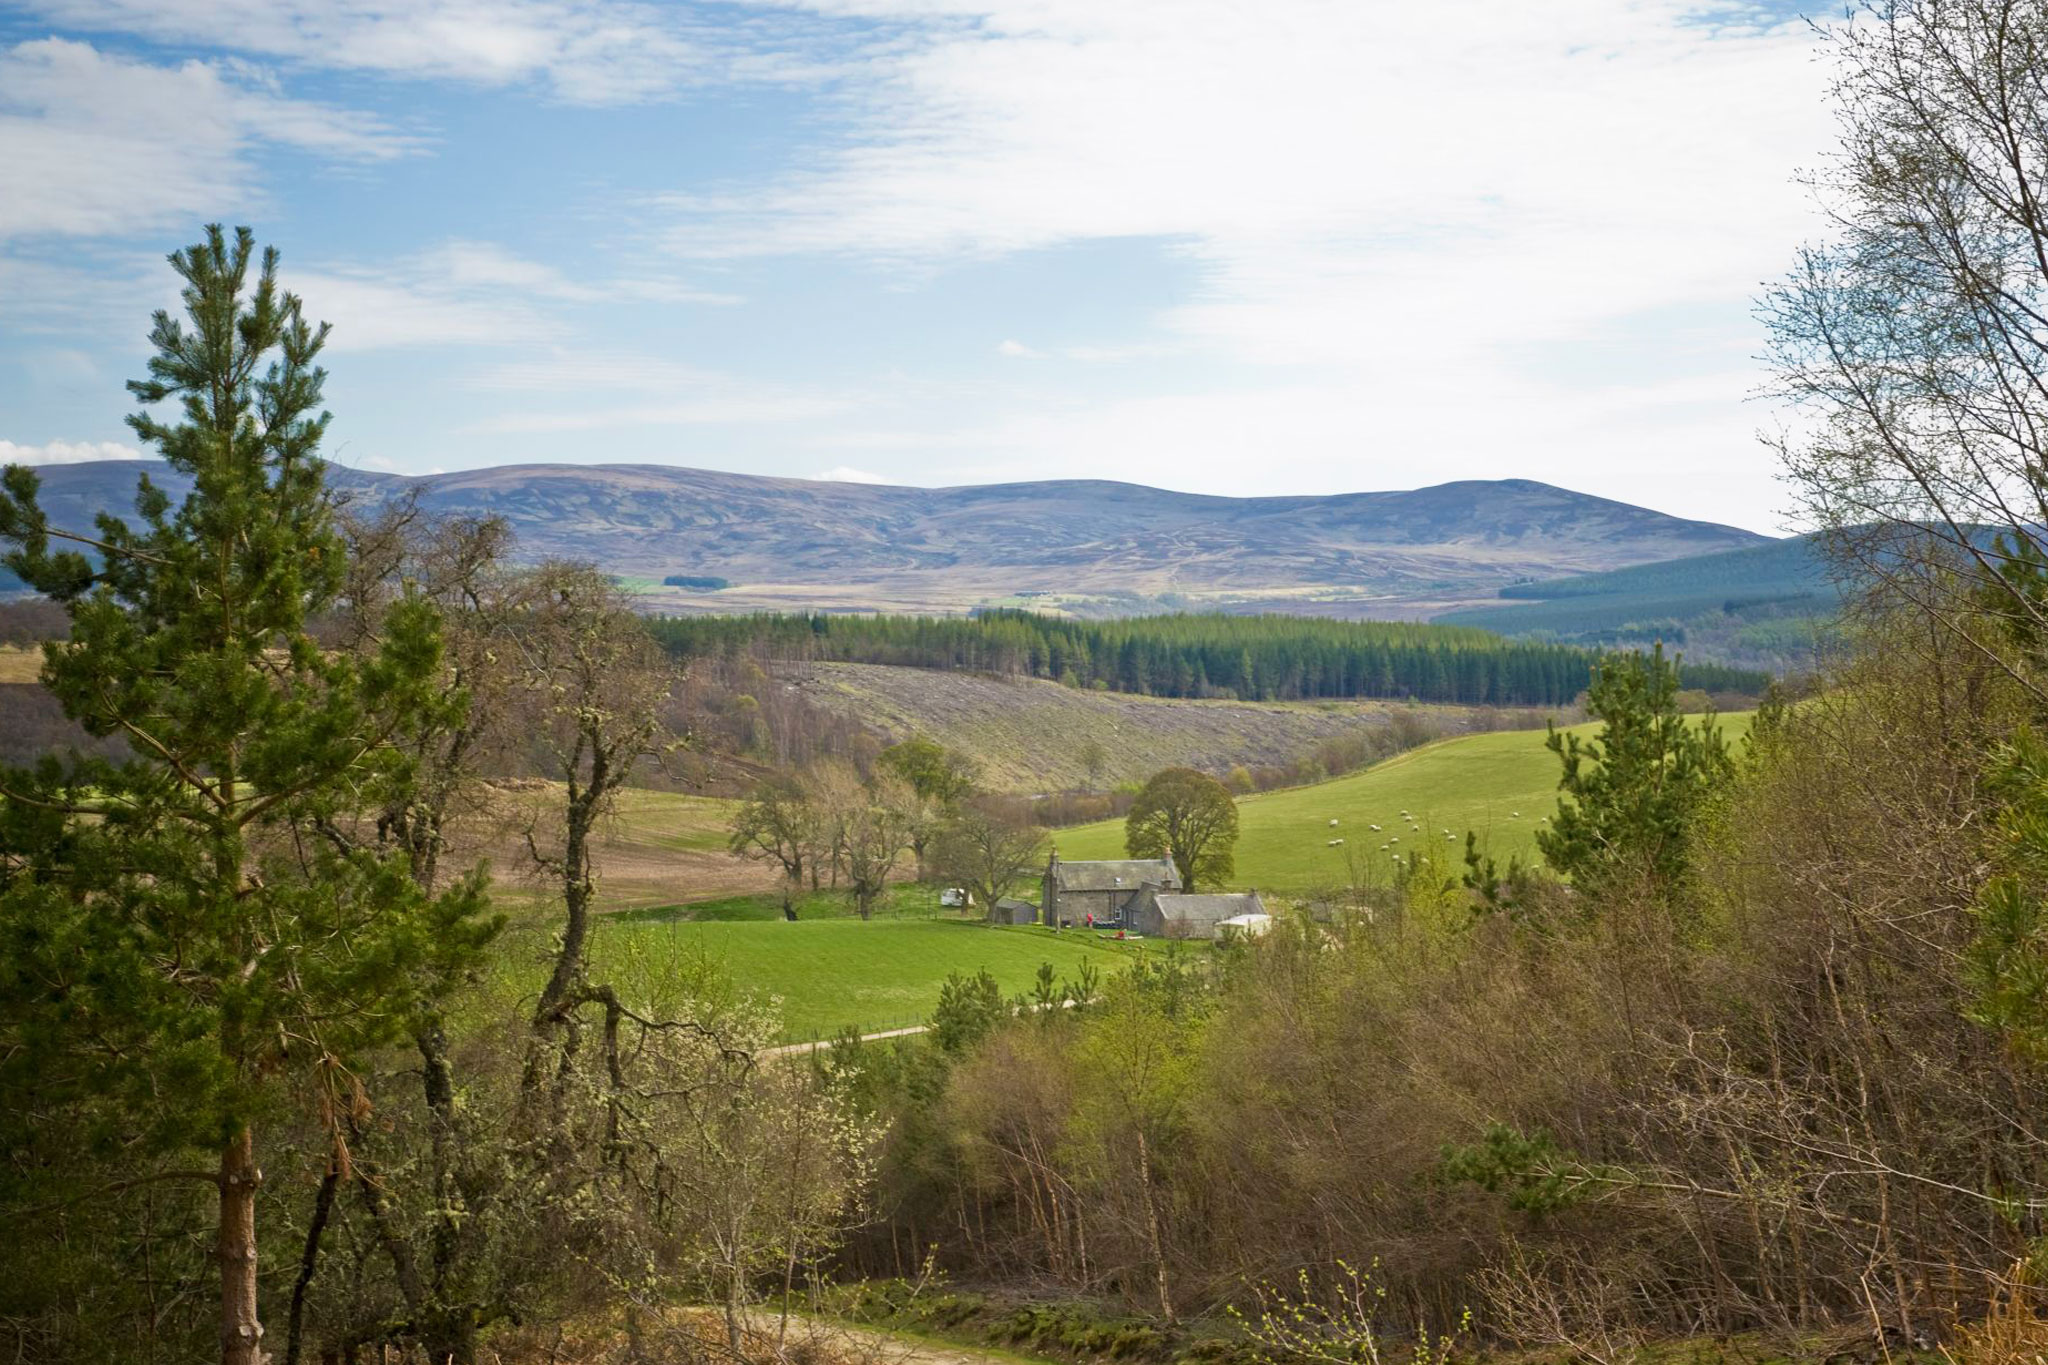 12 Surprising Facts About The Cairngorms National Park